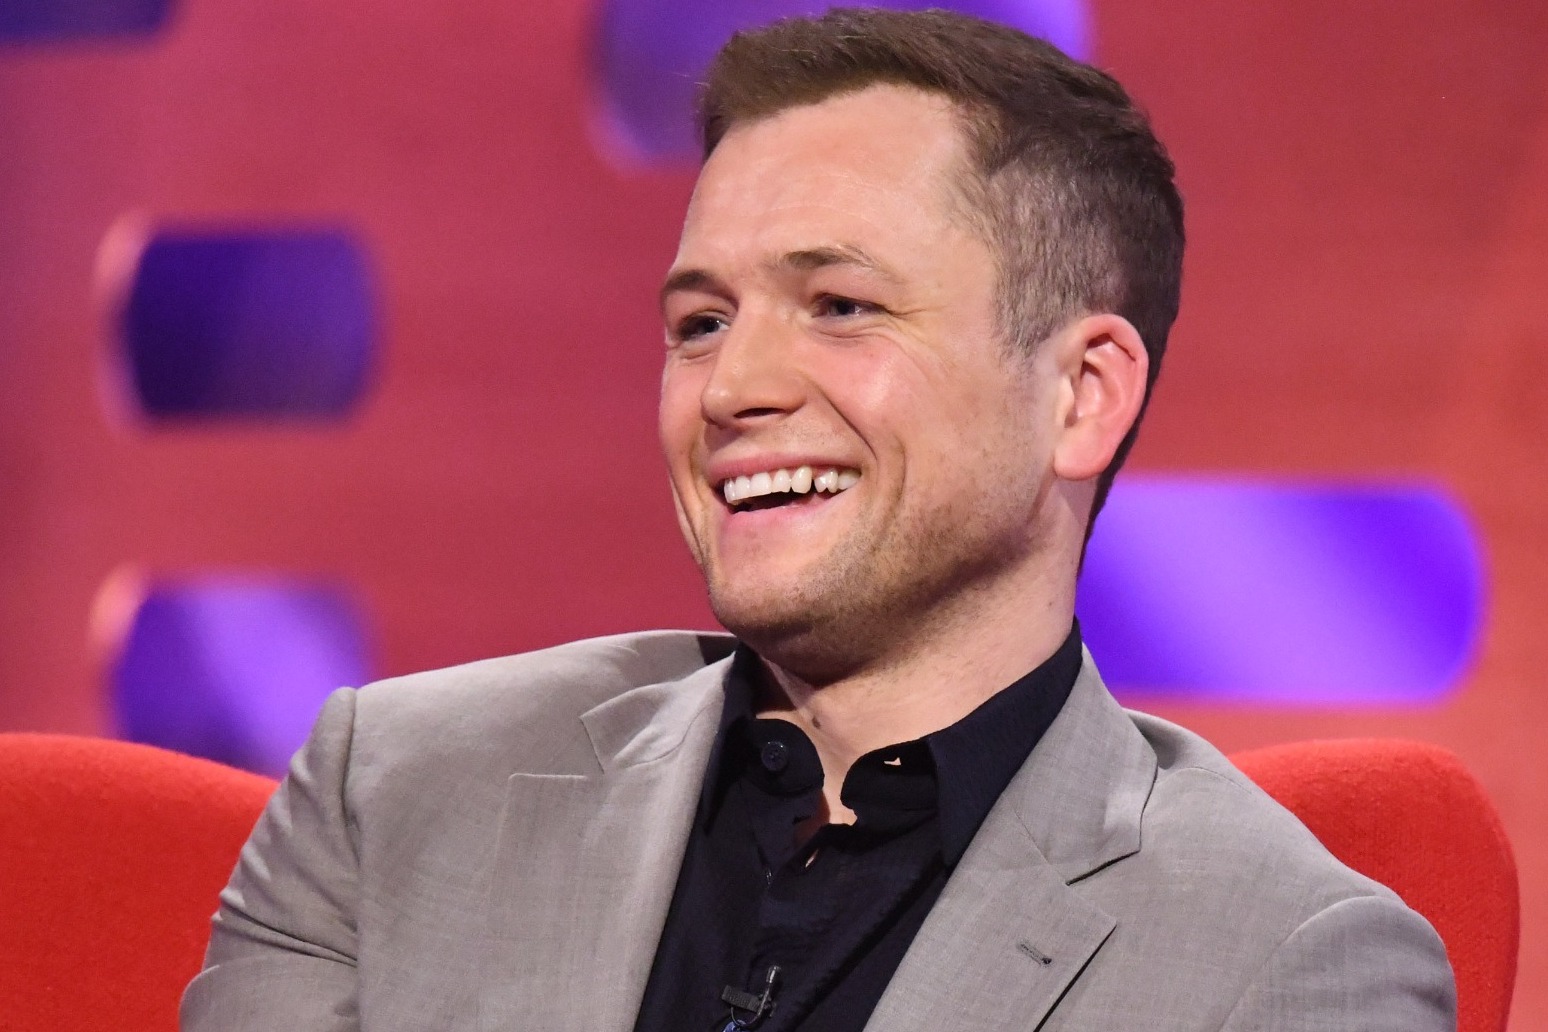 Taron Egerton says he is completely fine after fainting during West End play